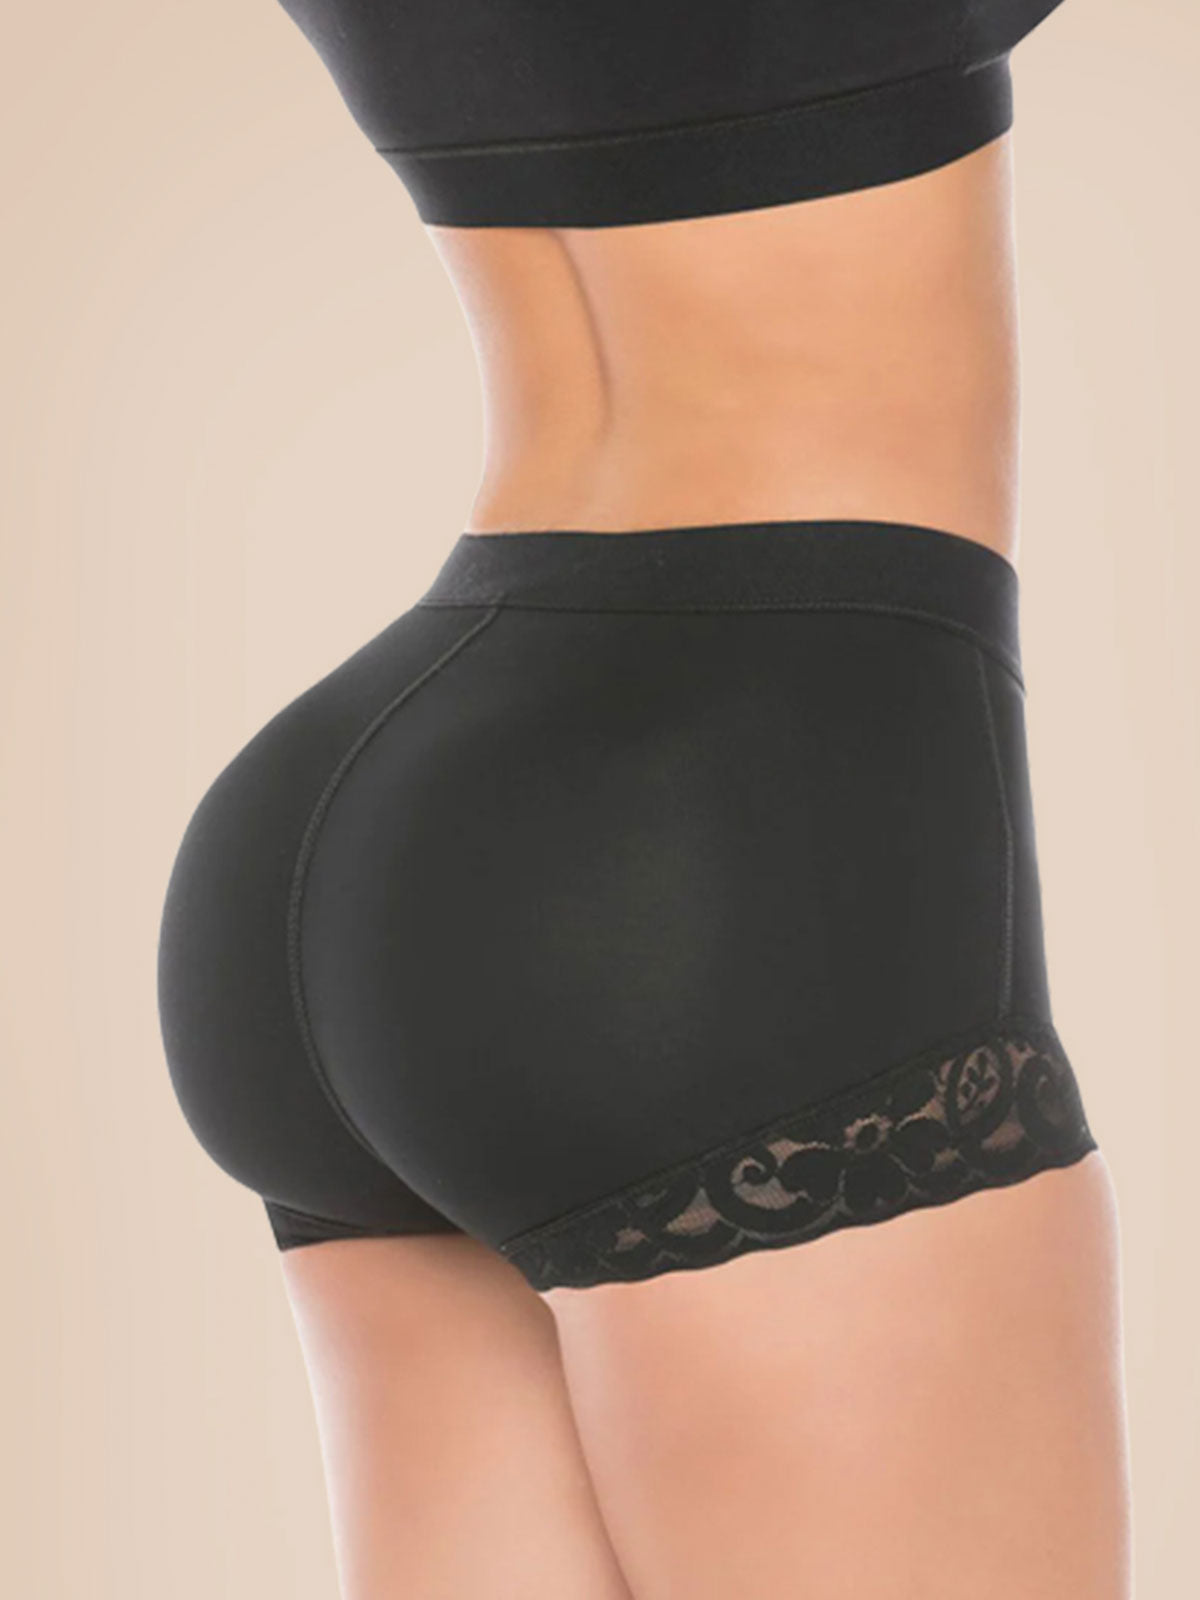 Panty Girdle Lifting Tail with Holes